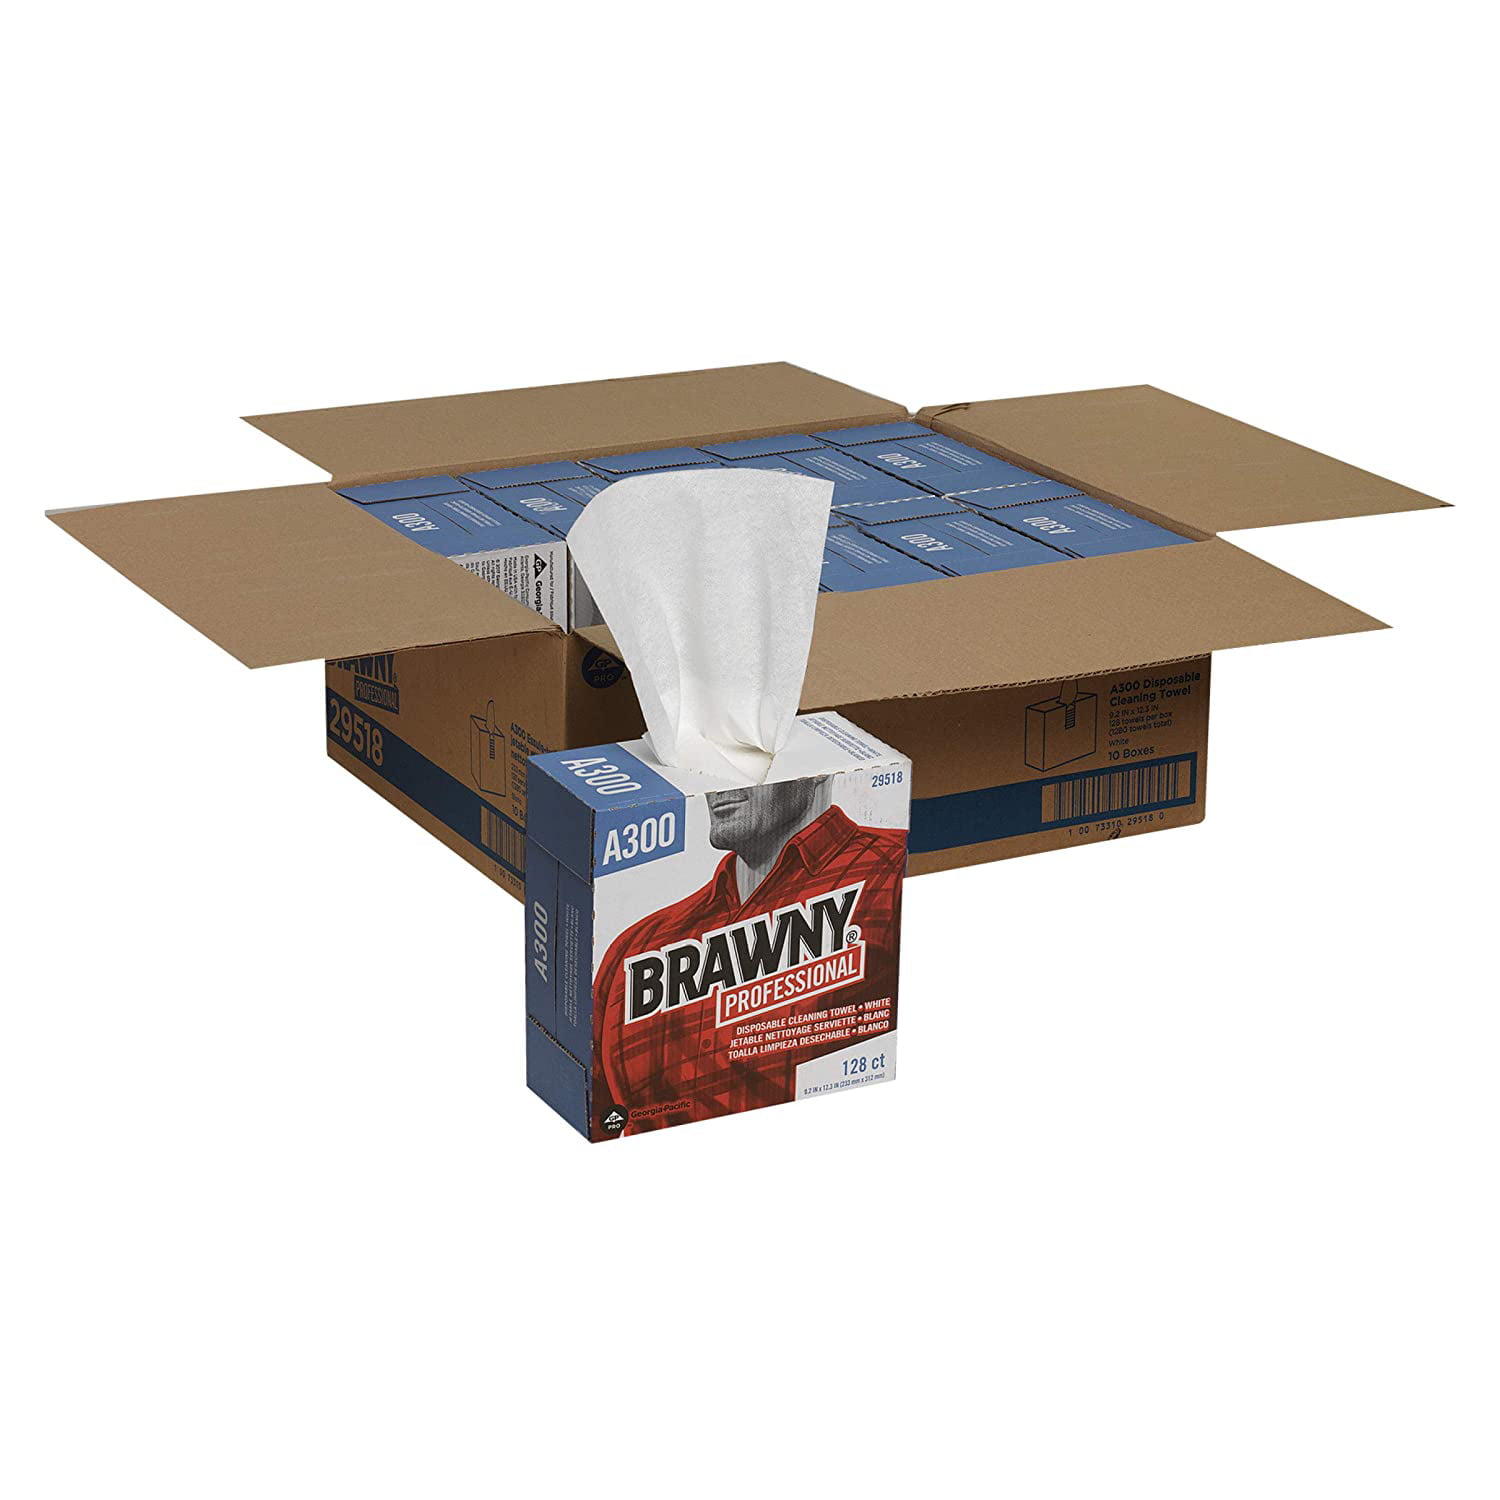 Brawny Professional A300 Disposable Cleaning Towel by GP PRO (), 29518,  White (128 Wipers per Box), 10 Boxes - Tall Box